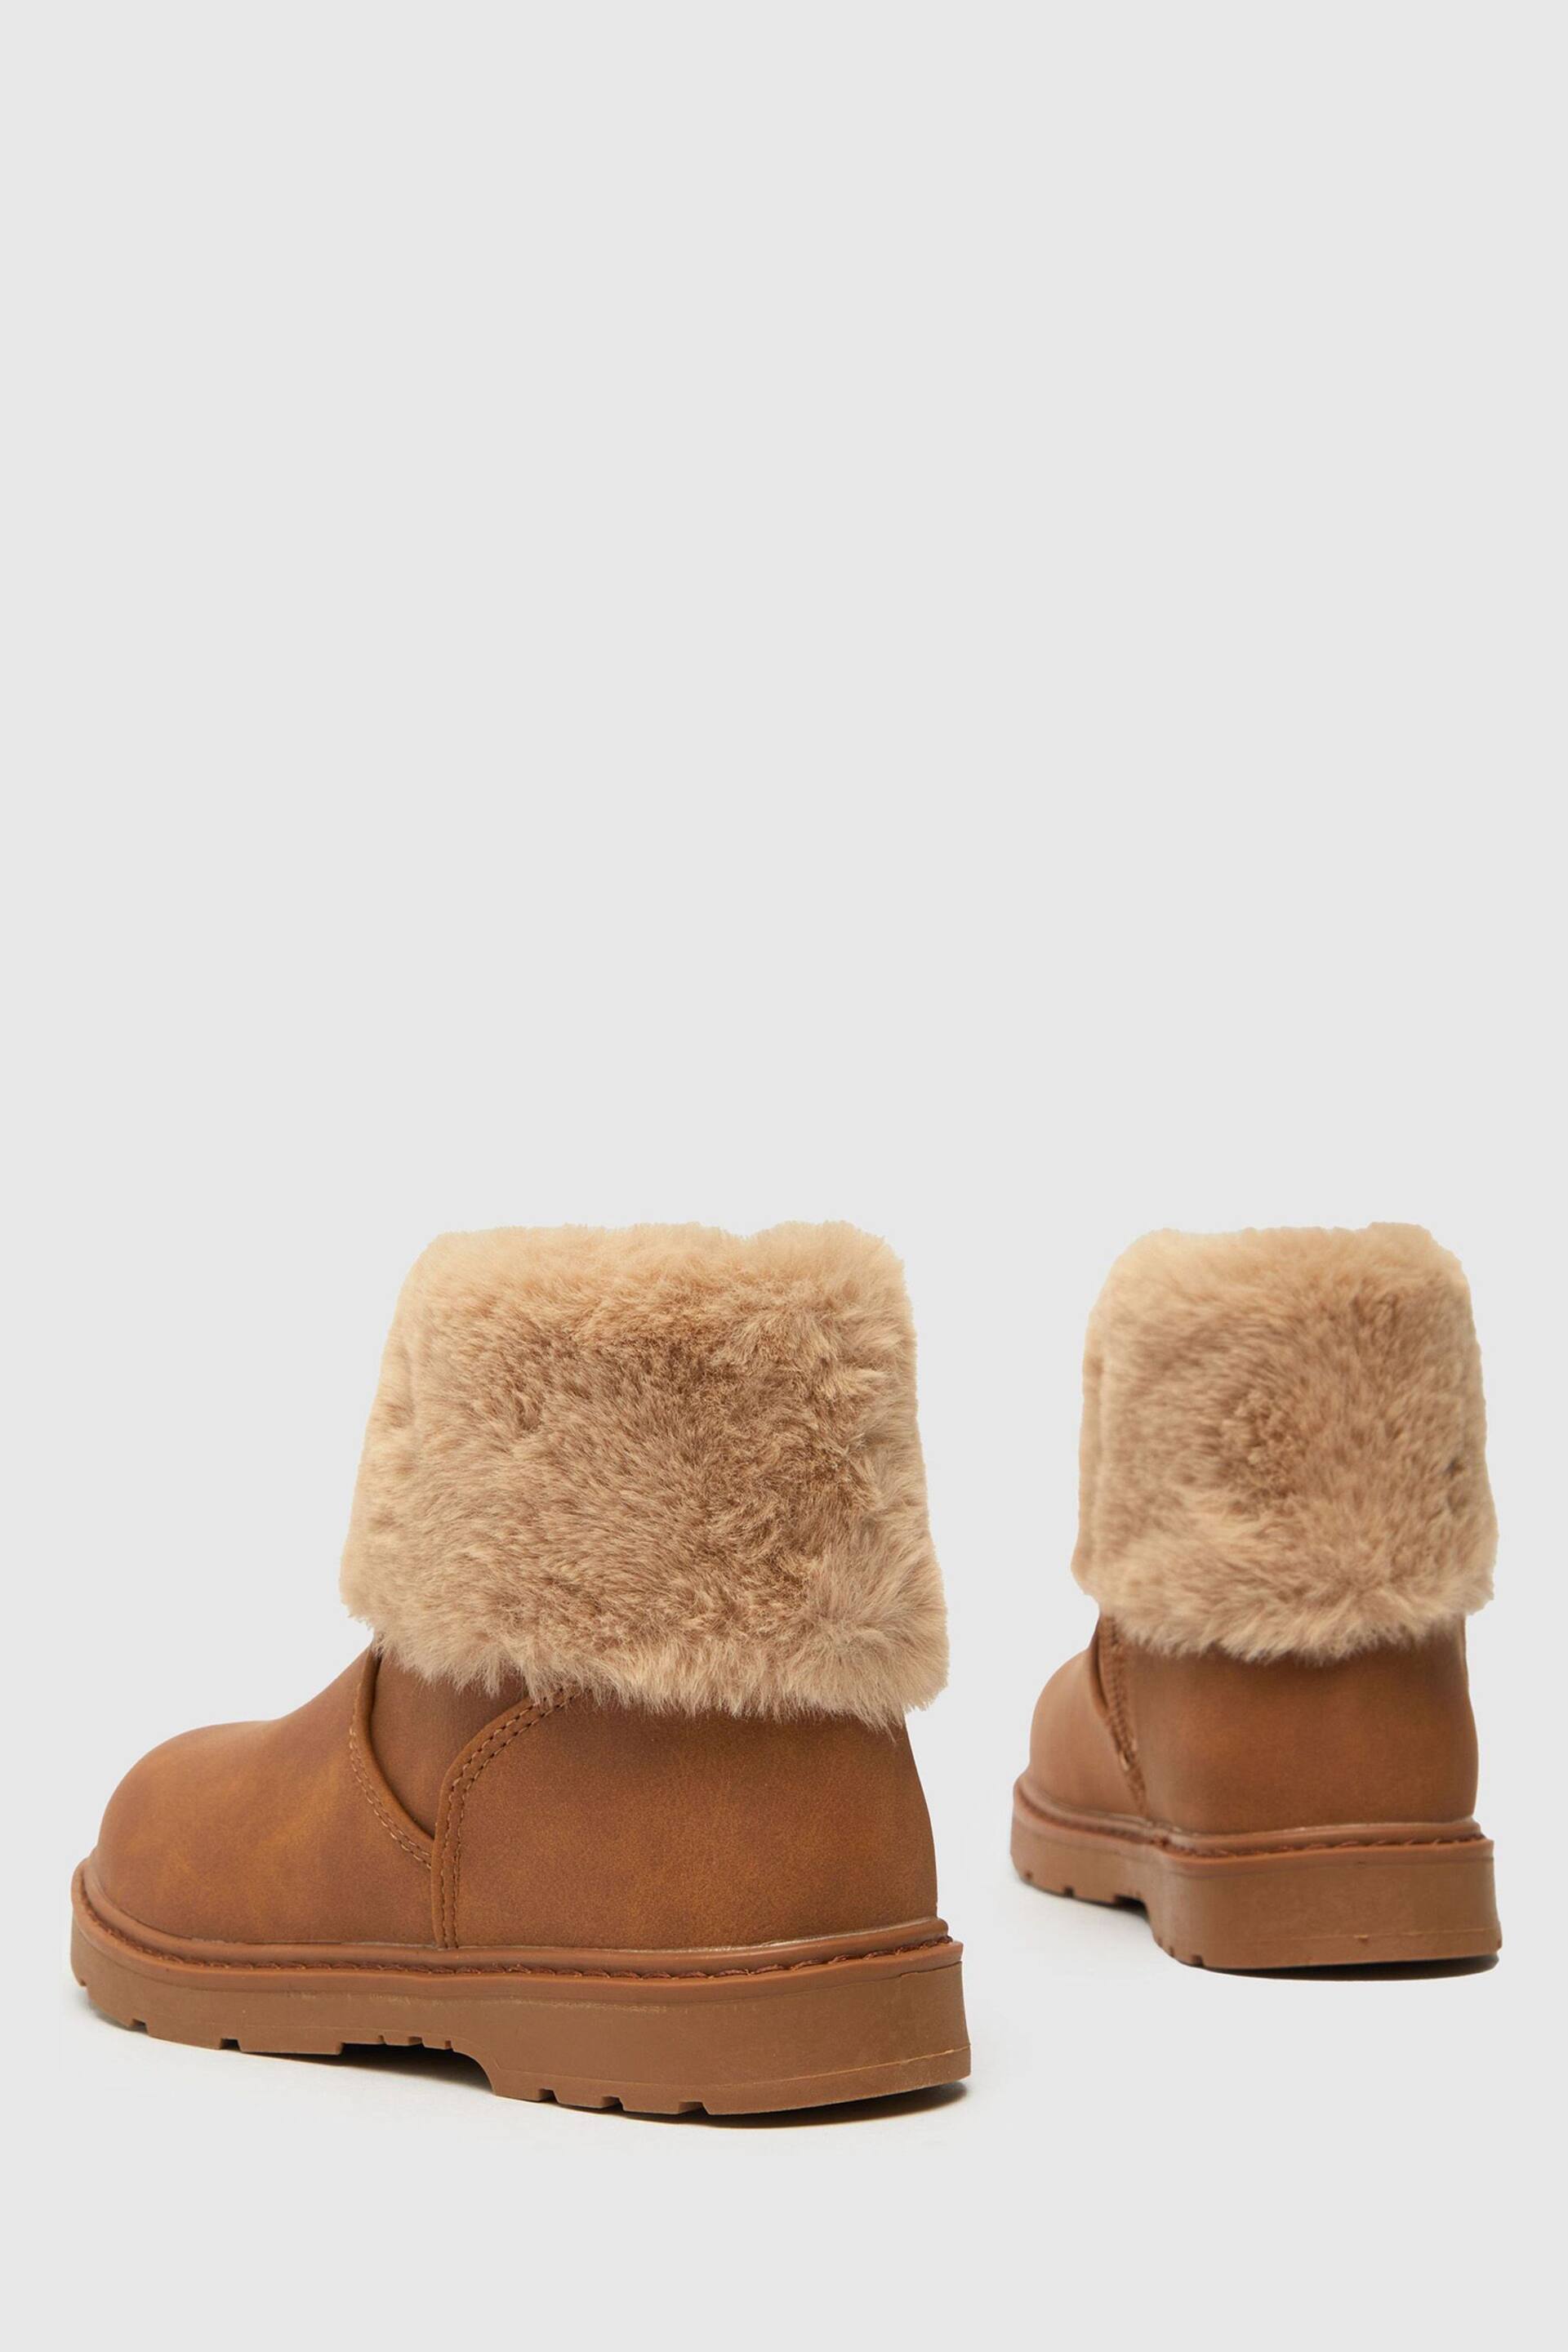 Schuh Charisma Natural Faux Fur Boots - Image 3 of 4